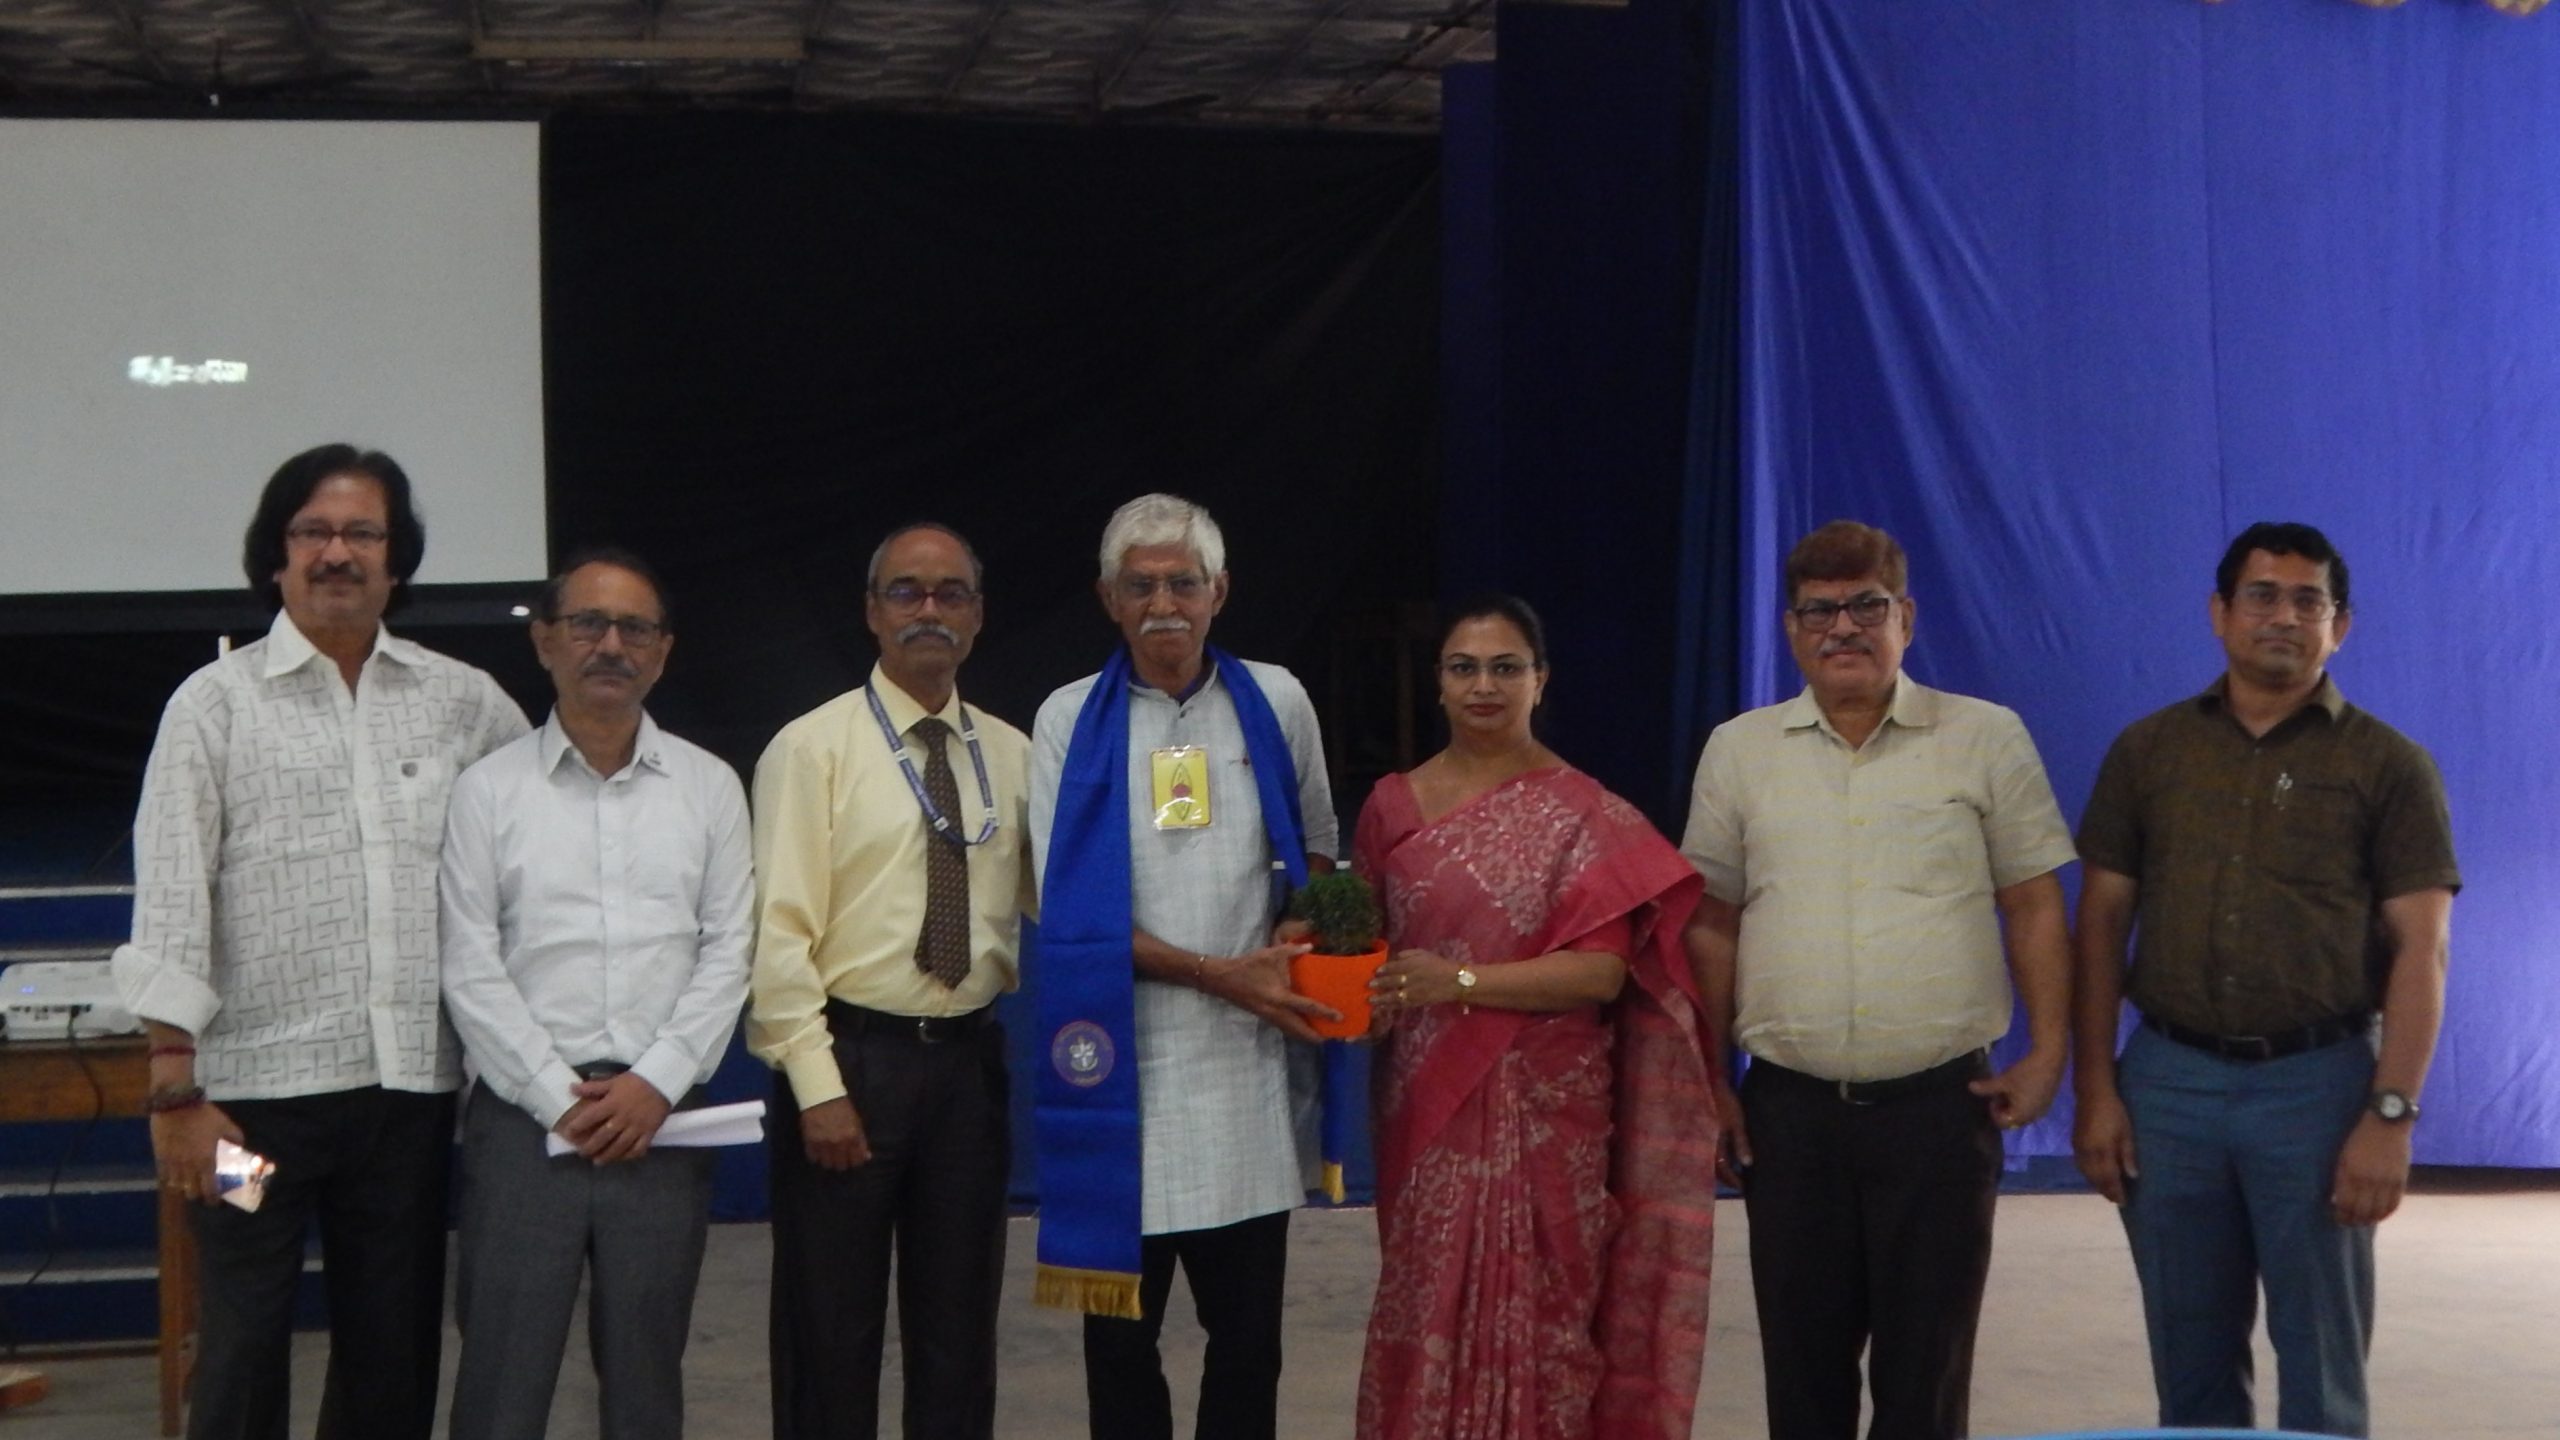 A RETURN TO OUR CULTURAL ROOTS WITH SPIC MACAY AND ROTARY